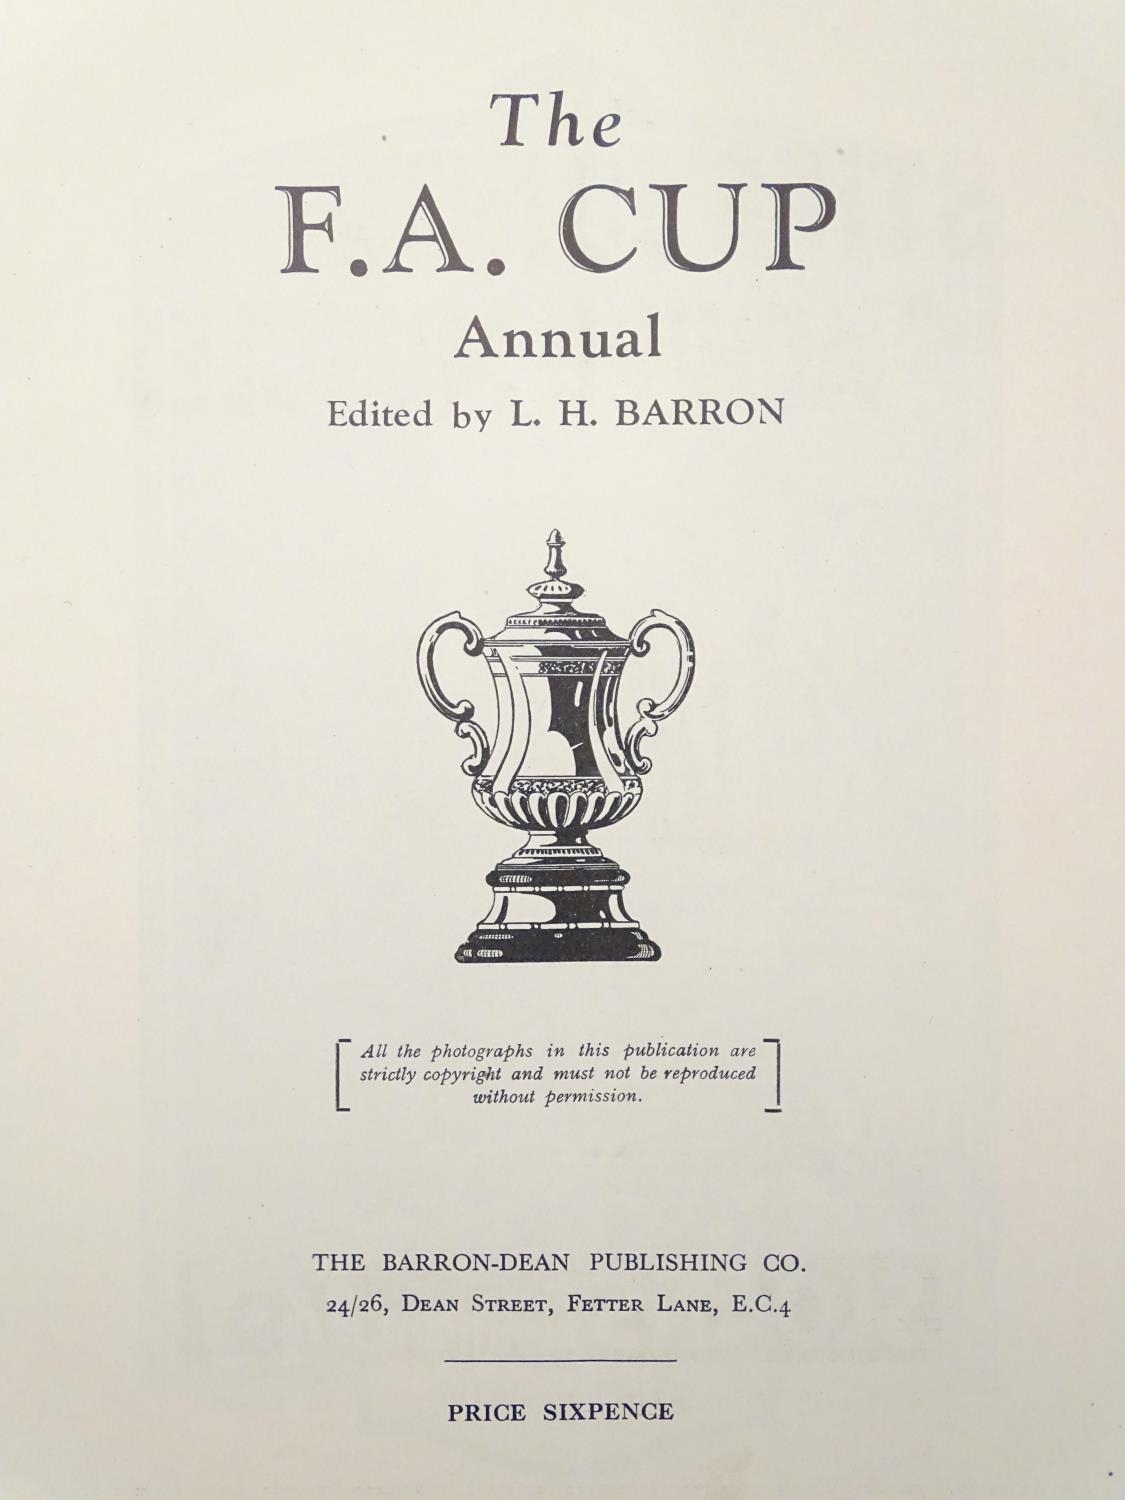 Book, sporting interest: The FA Cup Annual, King George V jubilee edition 1935, chronicling the - Image 4 of 7